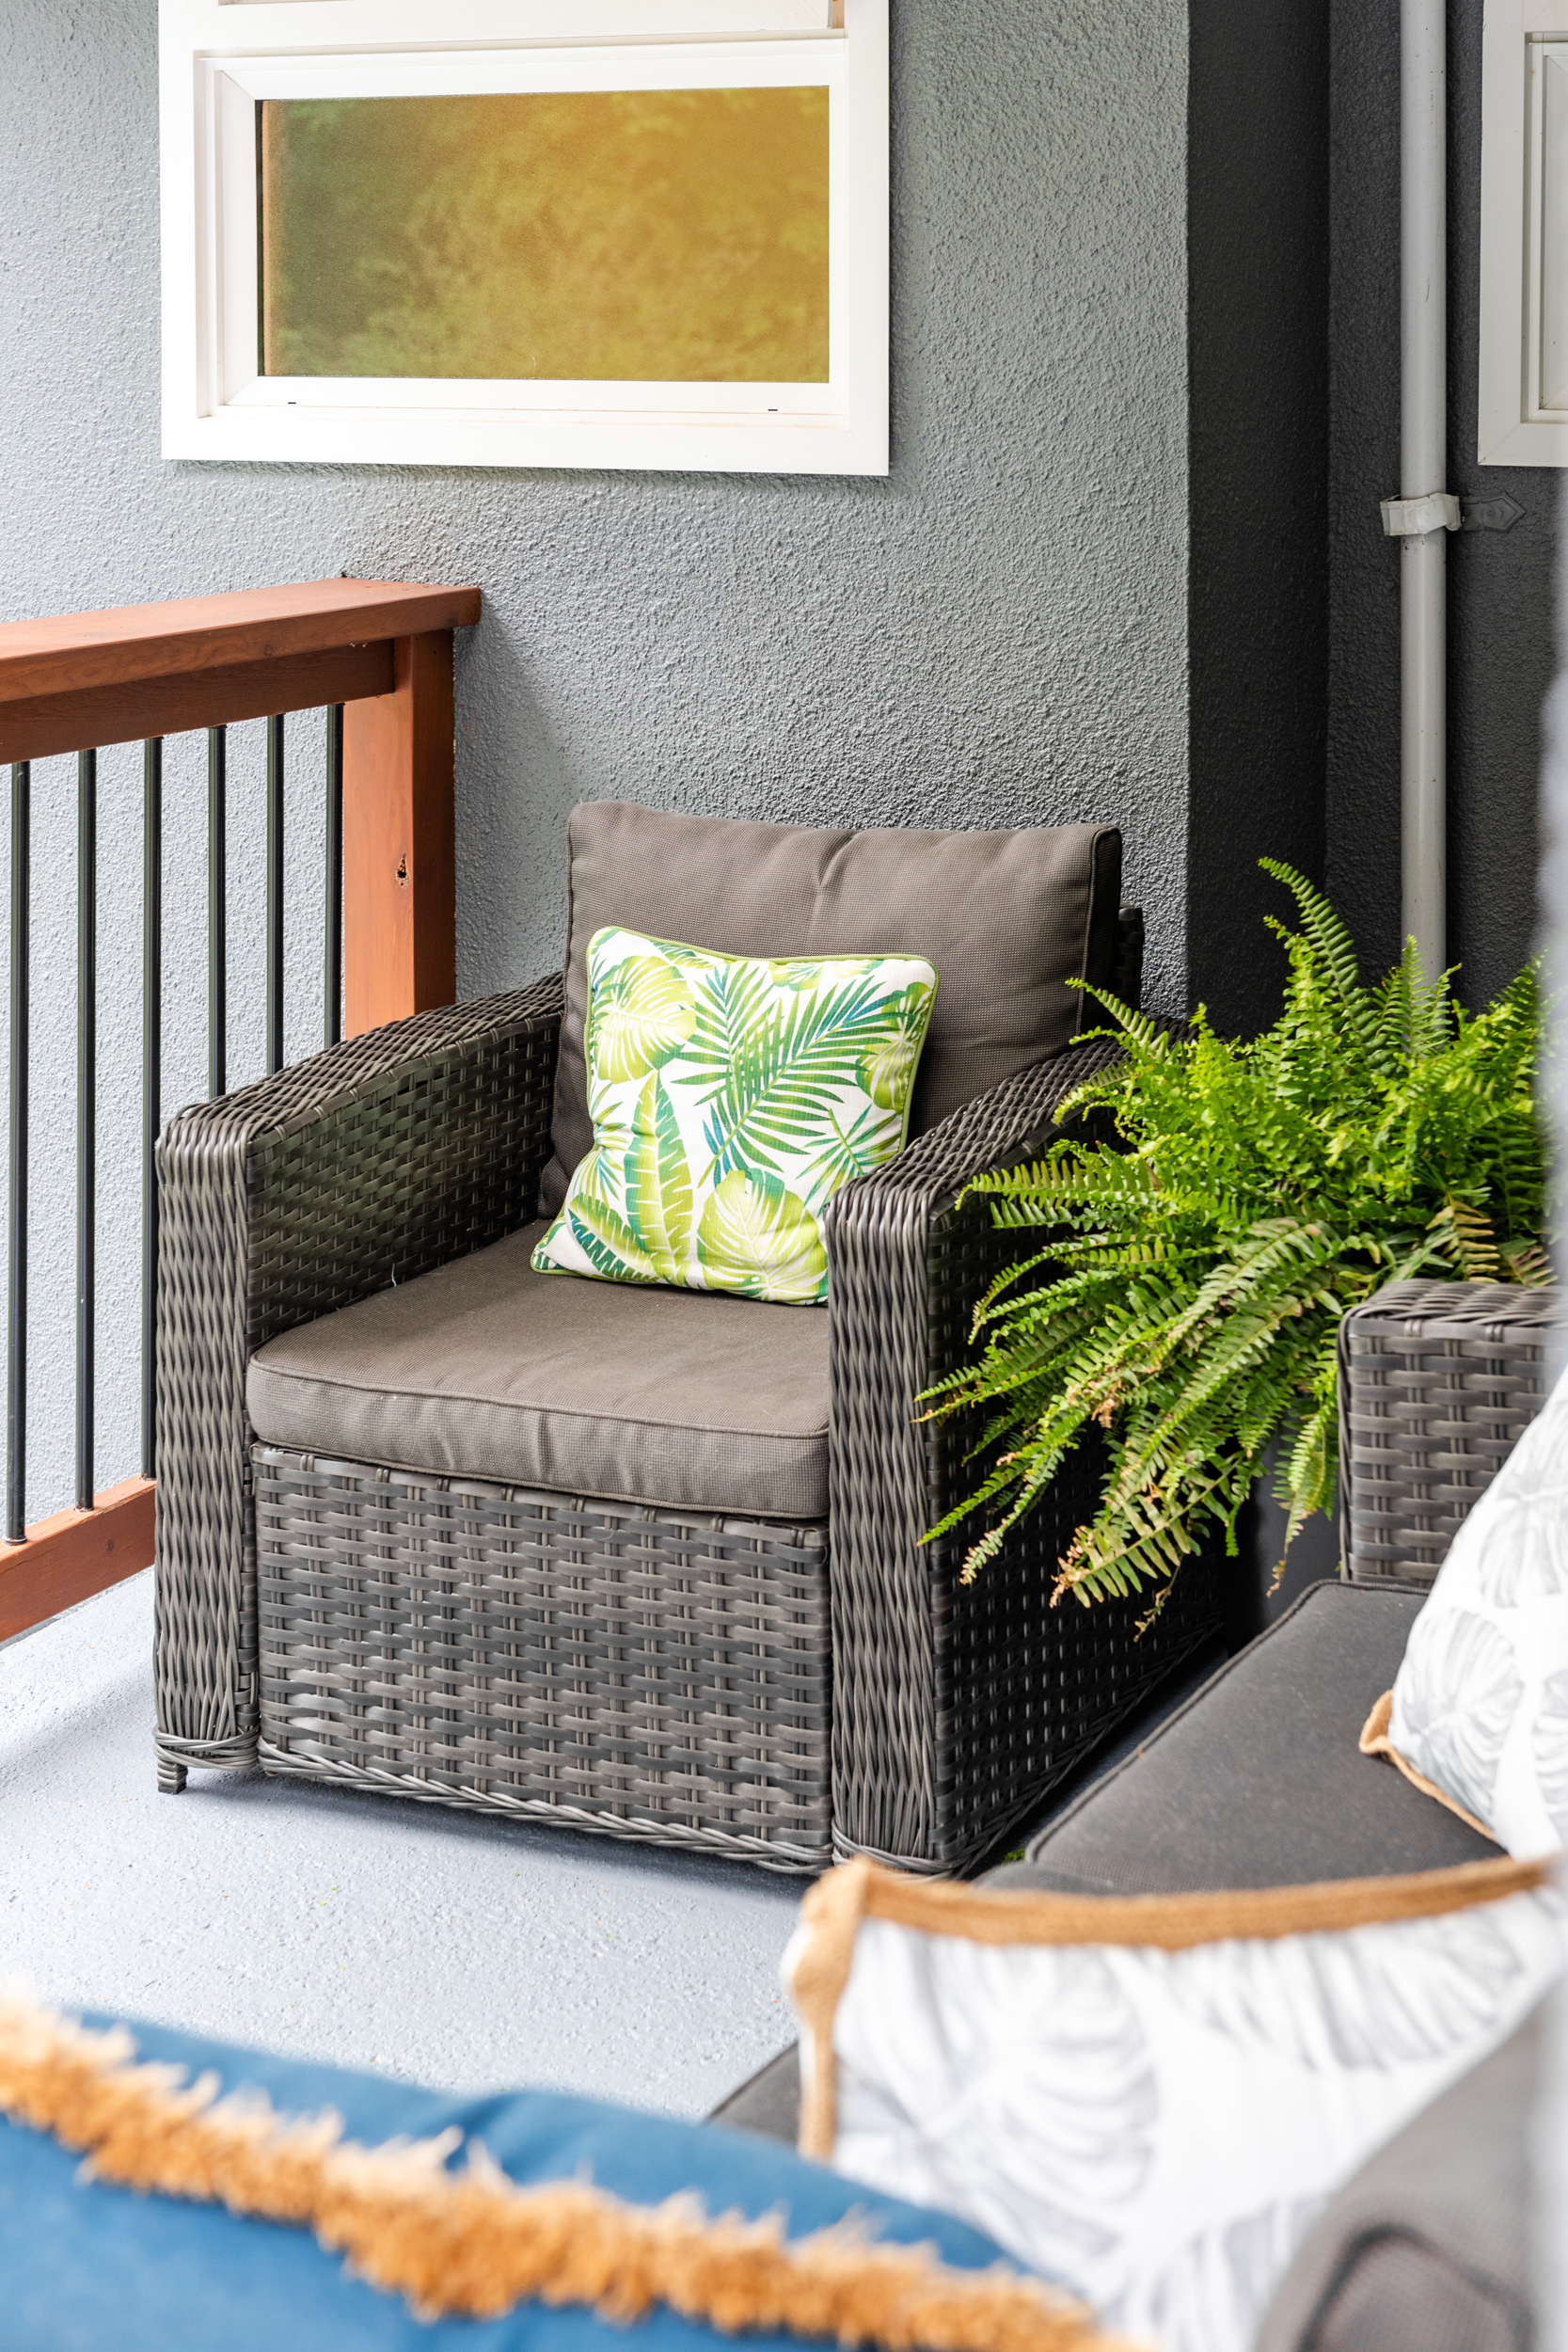 An outdoor armchair with a palm pillow.